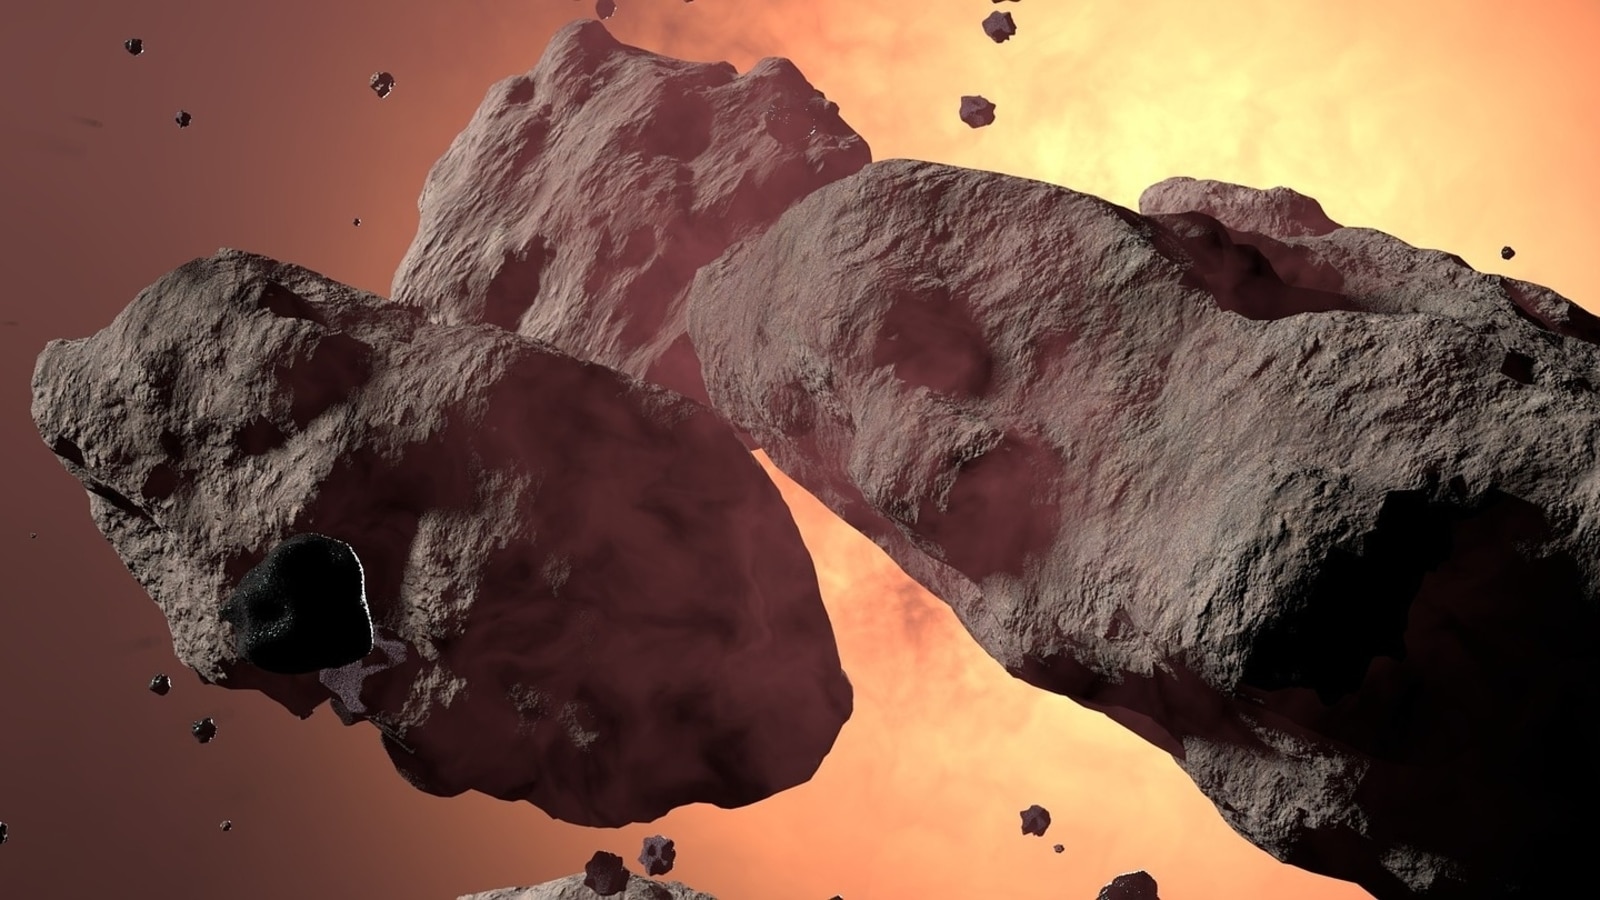 NASA asteroid watch: Space rock hurtling towards Earth! Planet in peril?